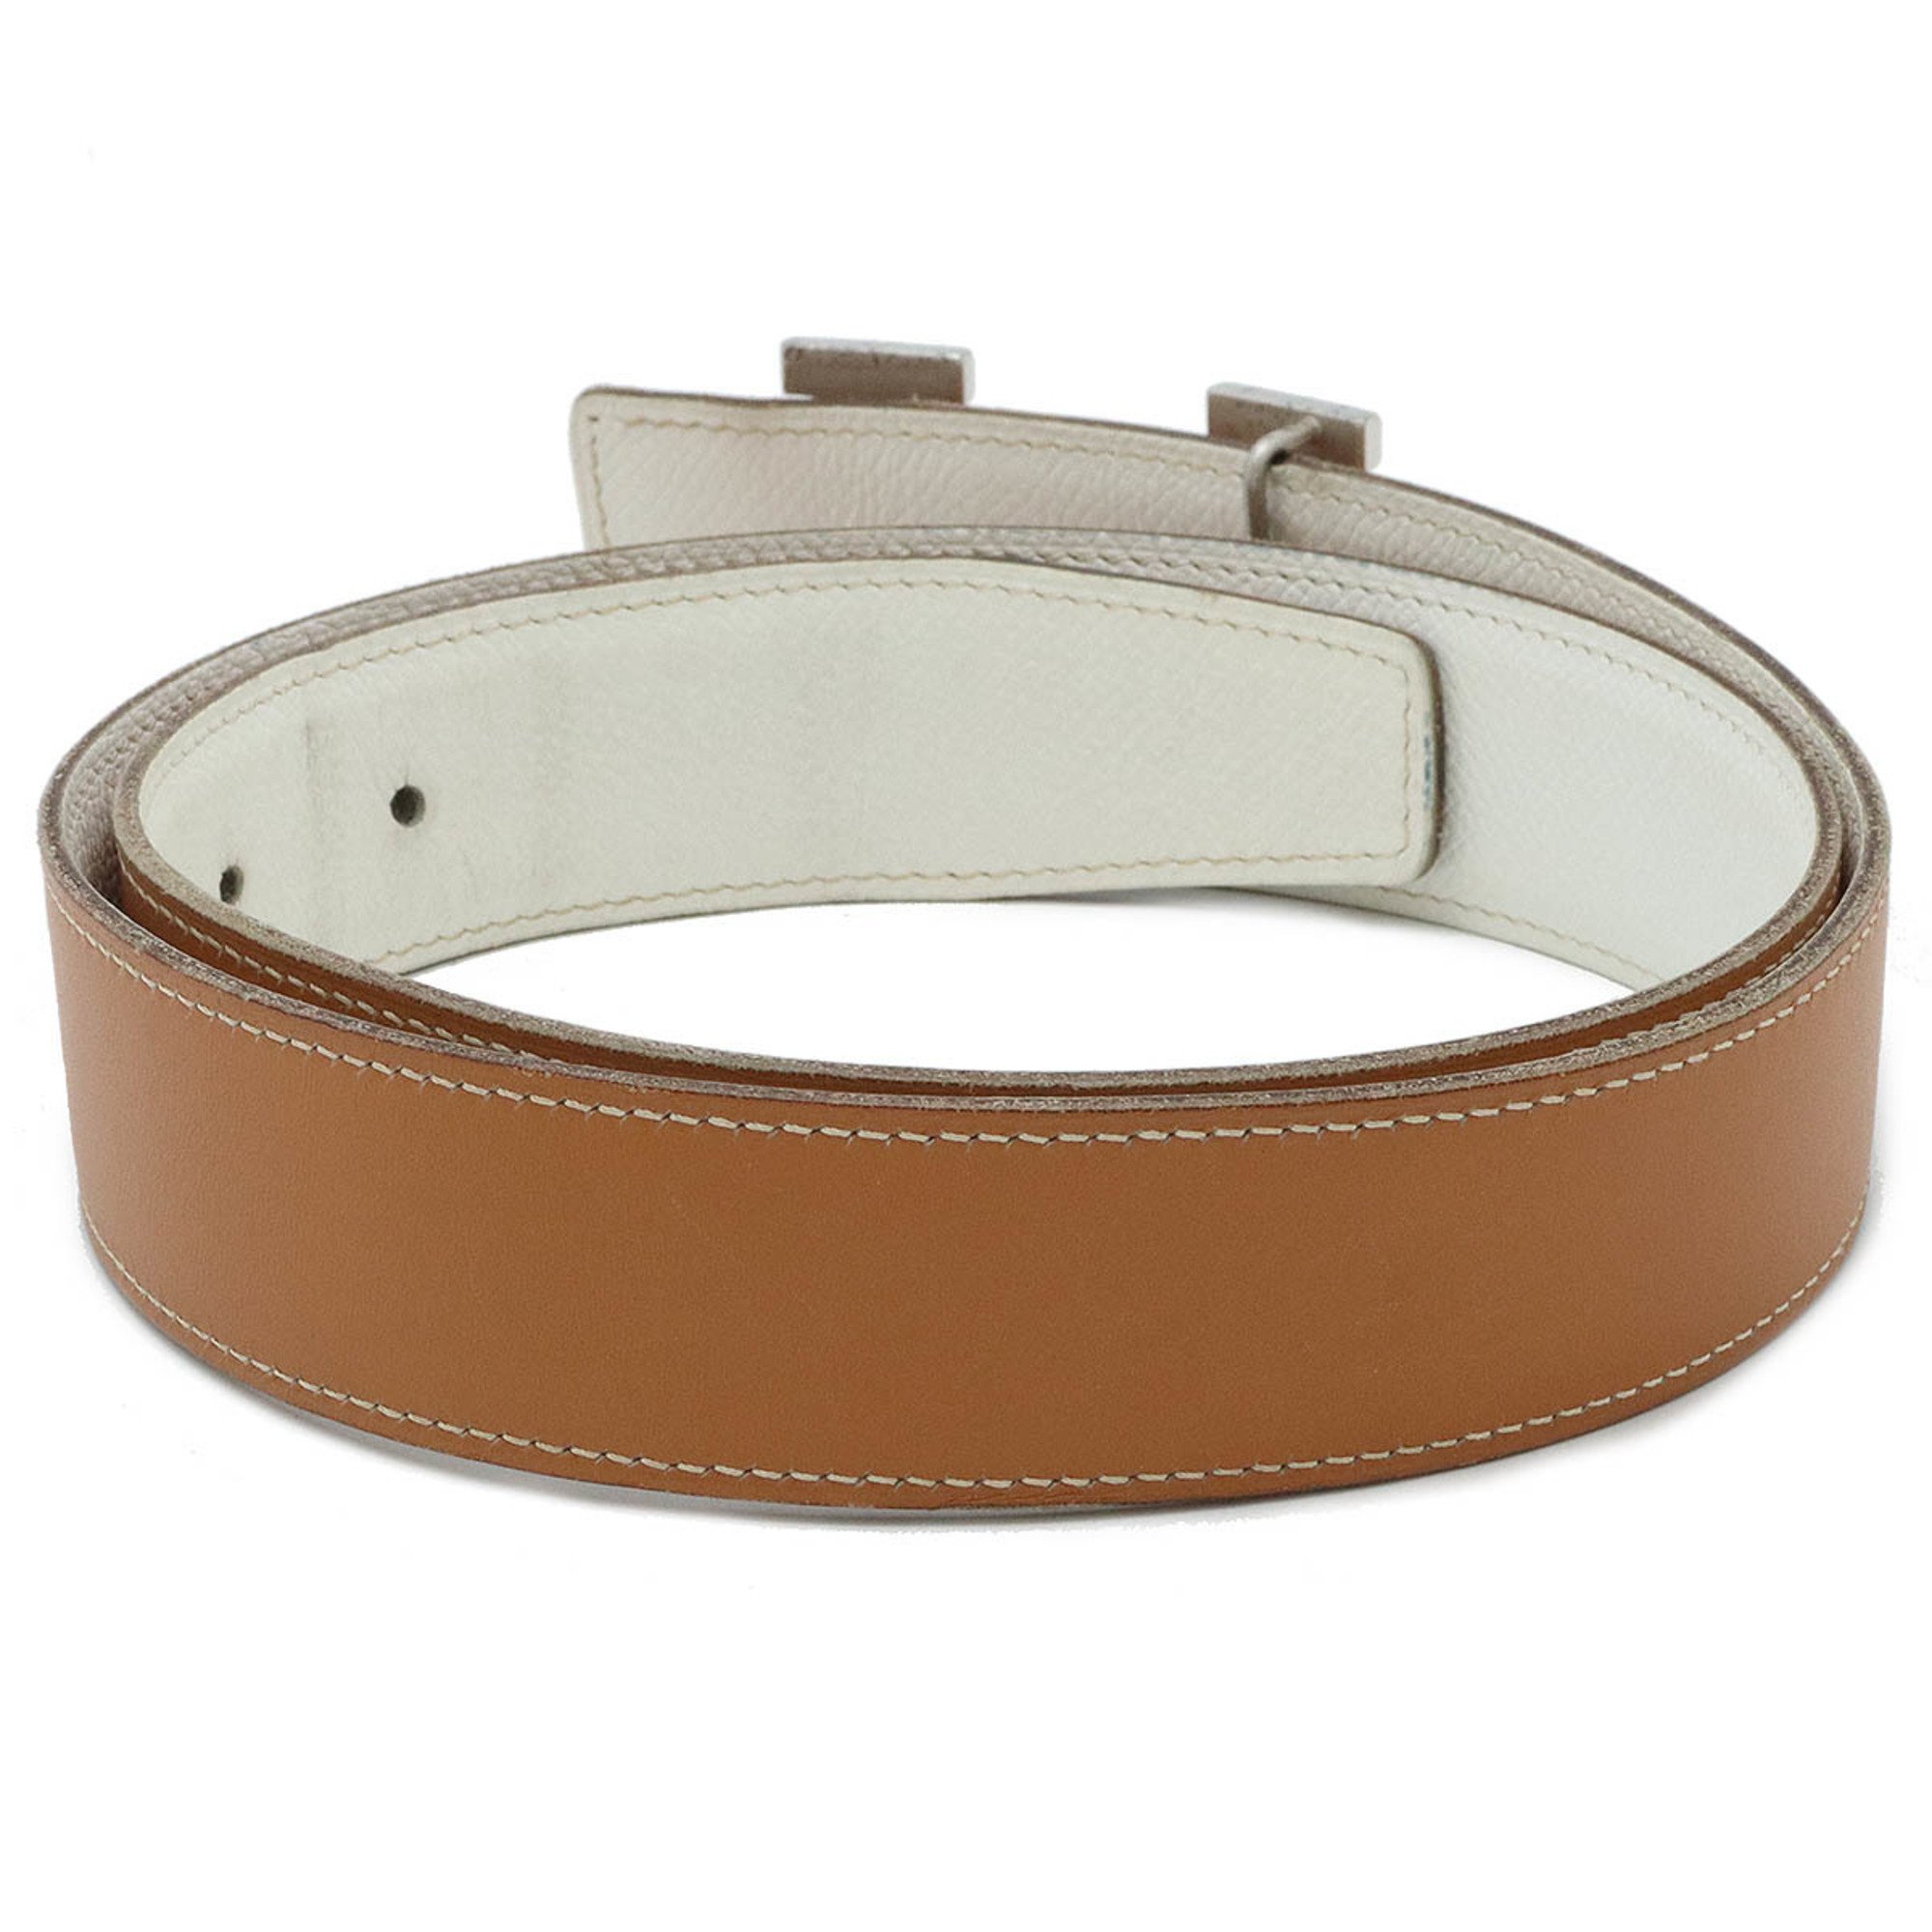 HERMES Constance H Belt, reversible leather, brown, white, #80, stamp